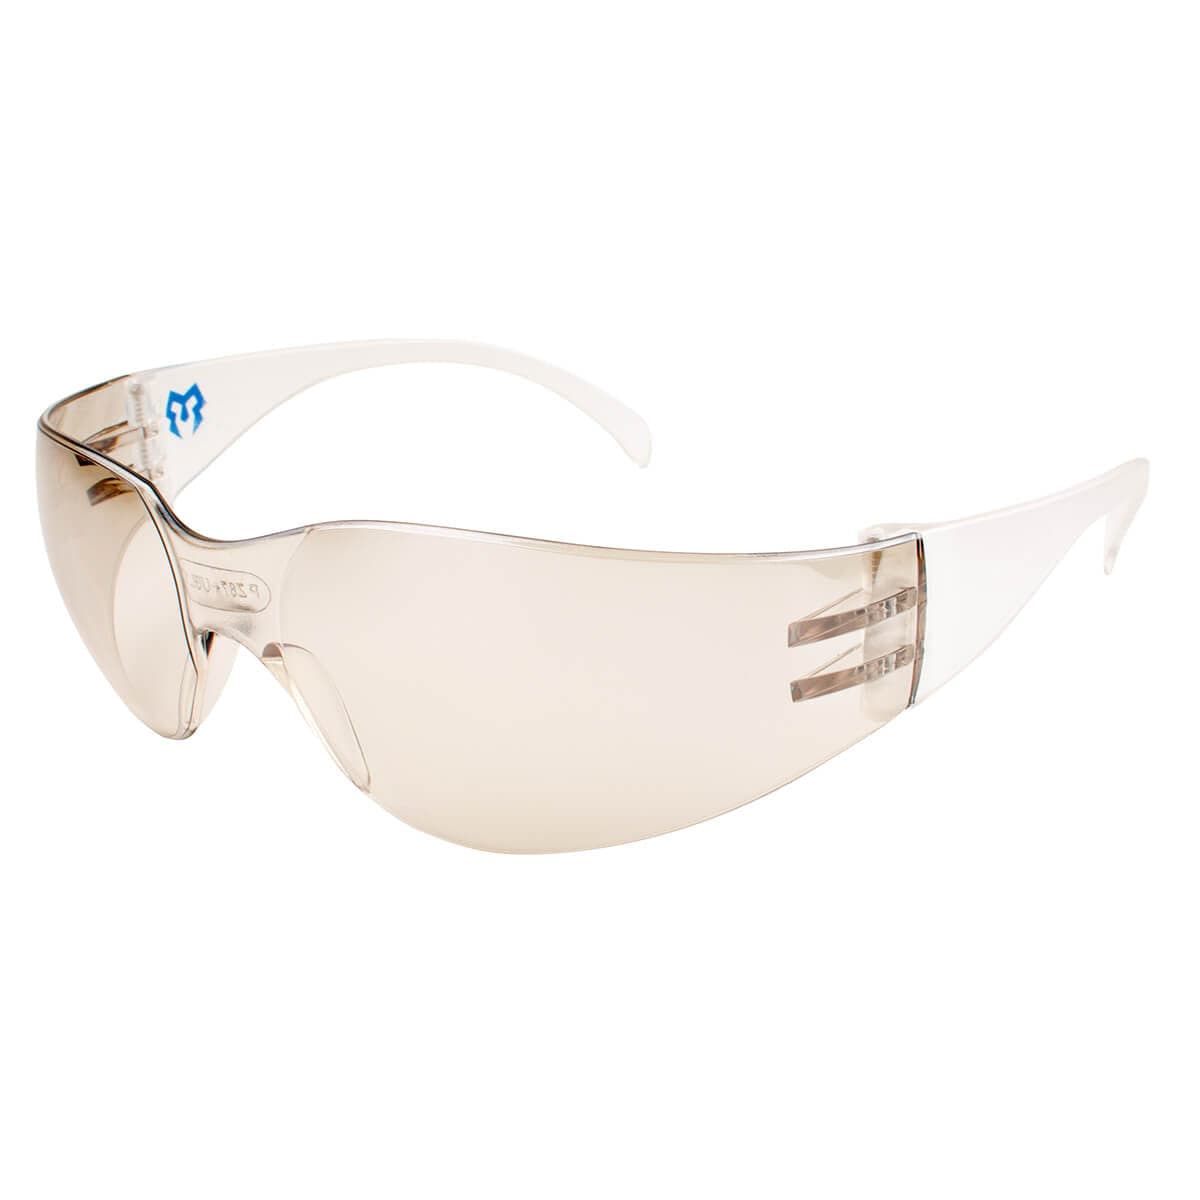 Chief Miller Protective Eyewear METEL M10 Safety Glasses Ultra-lightweight, Economical, Multiple Lens Options Apparel